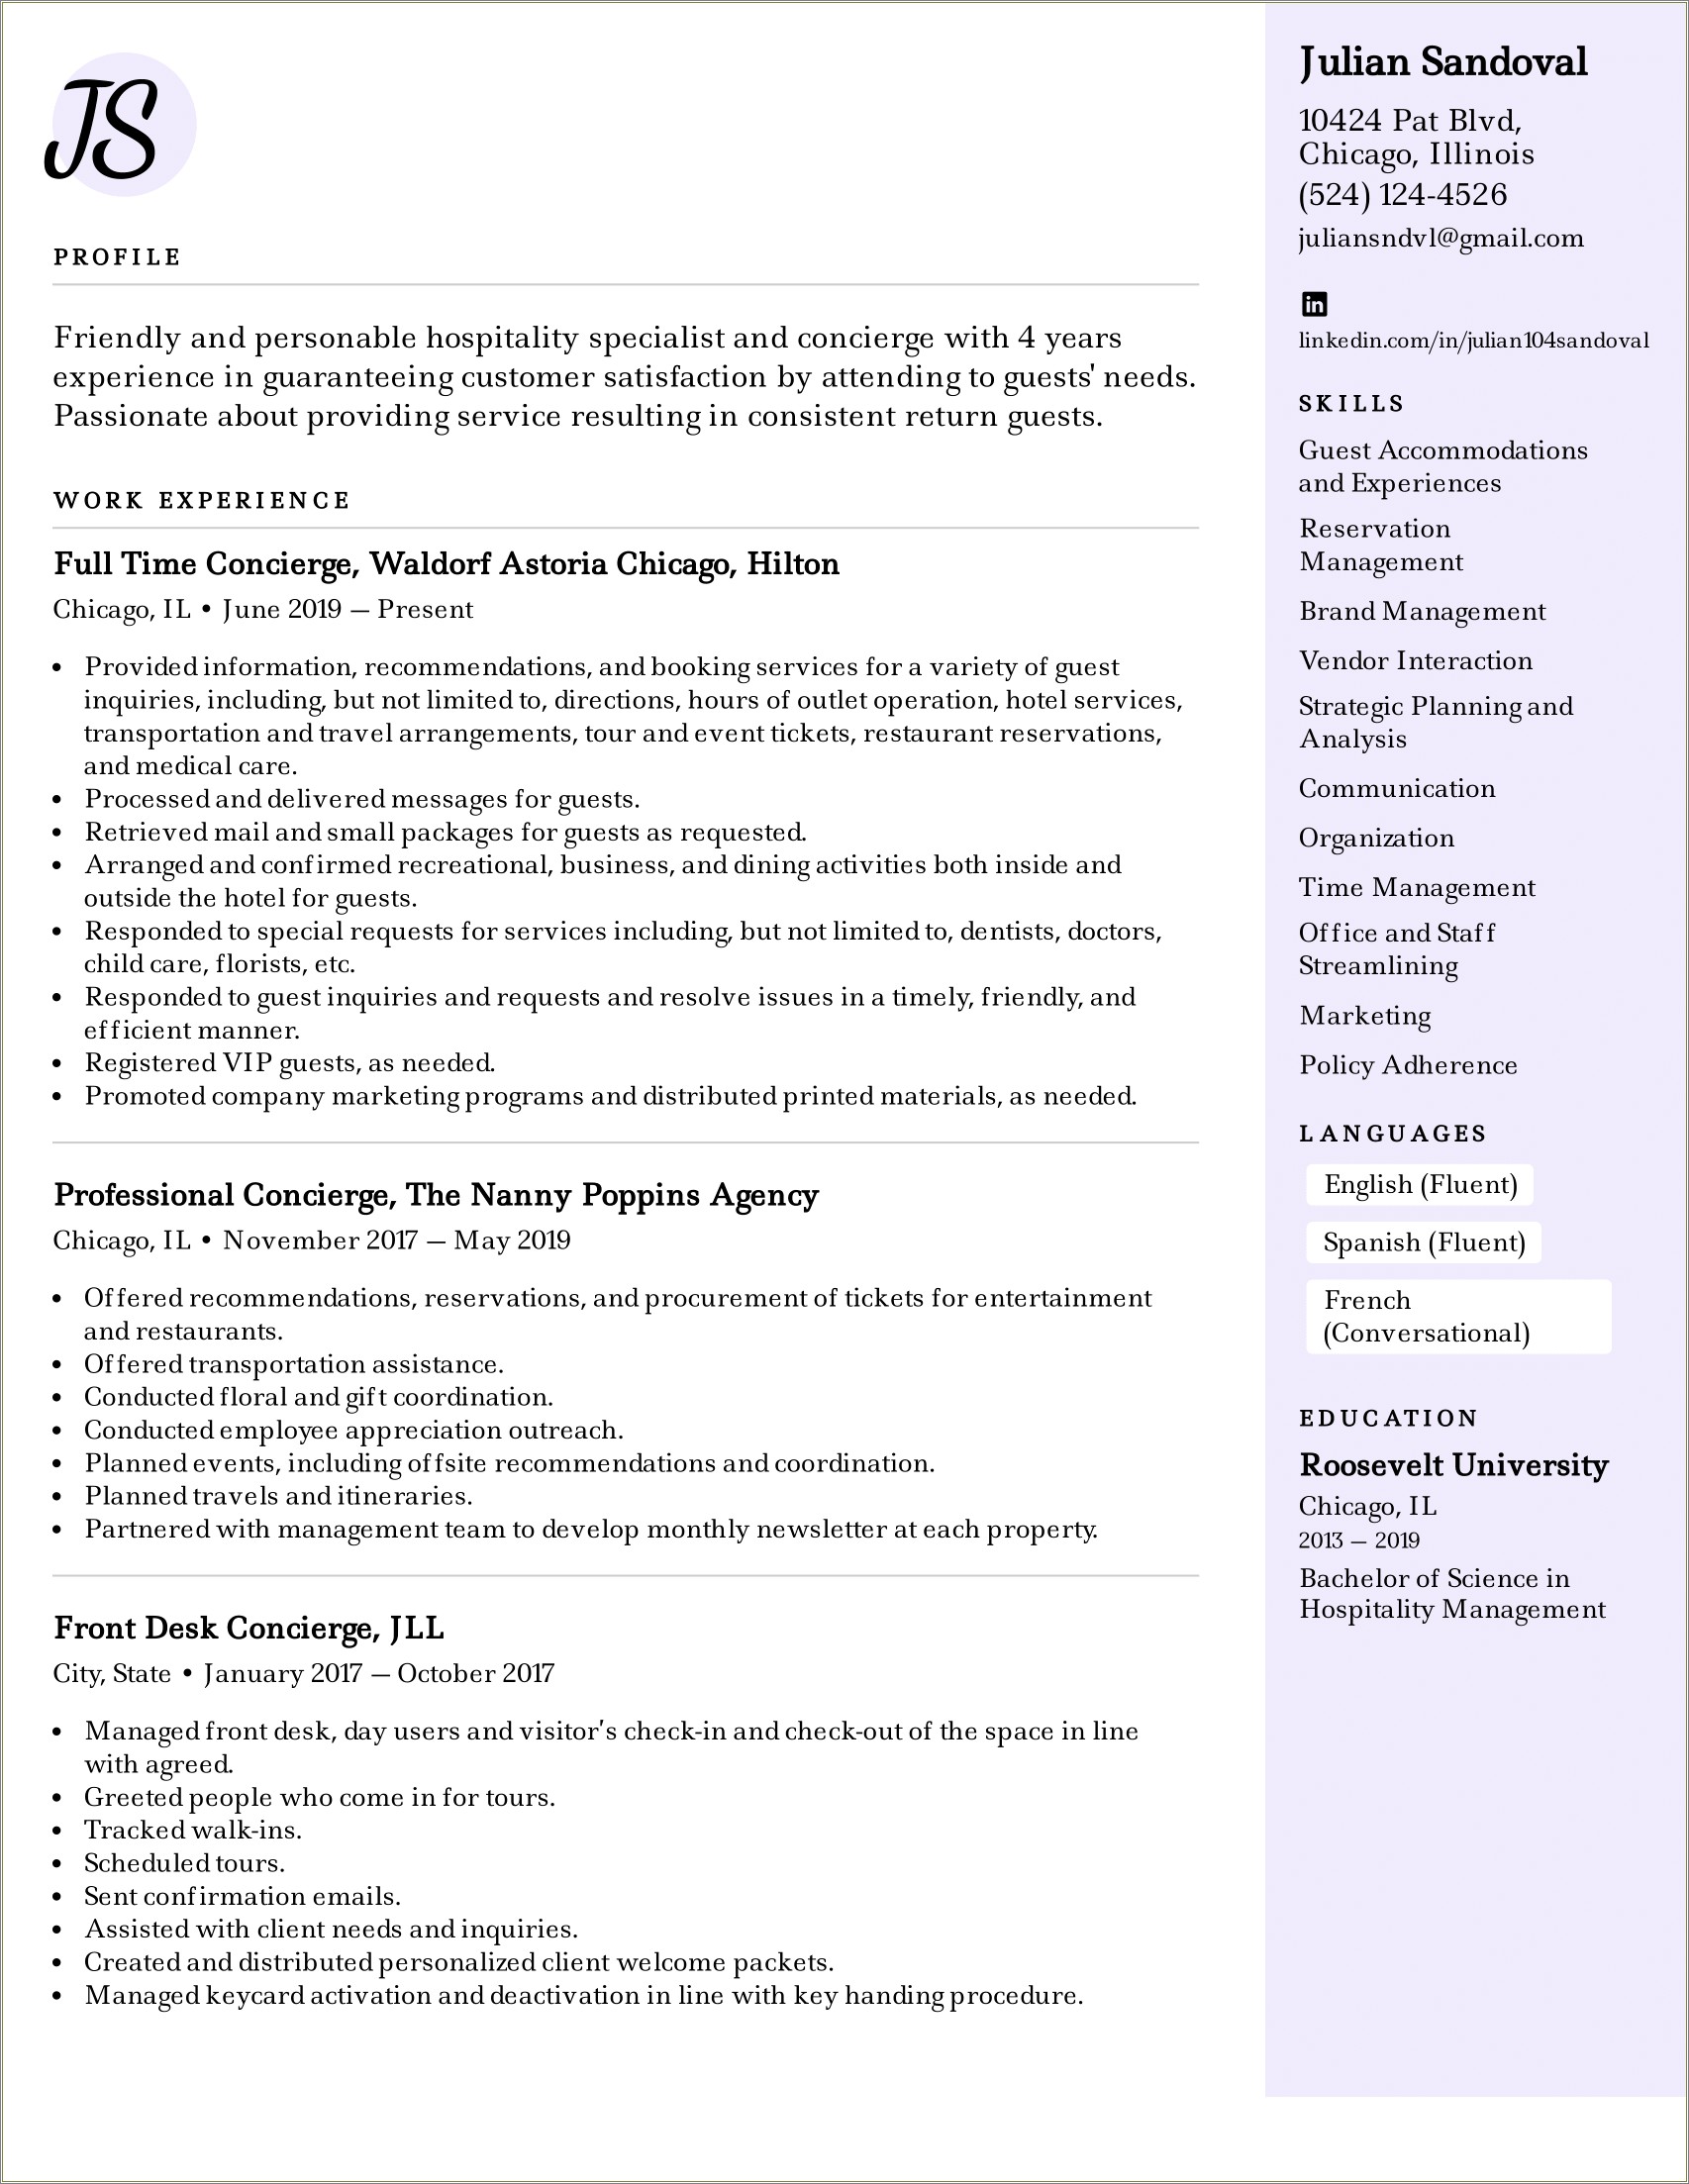 Professional Summary For Resume For Concierge